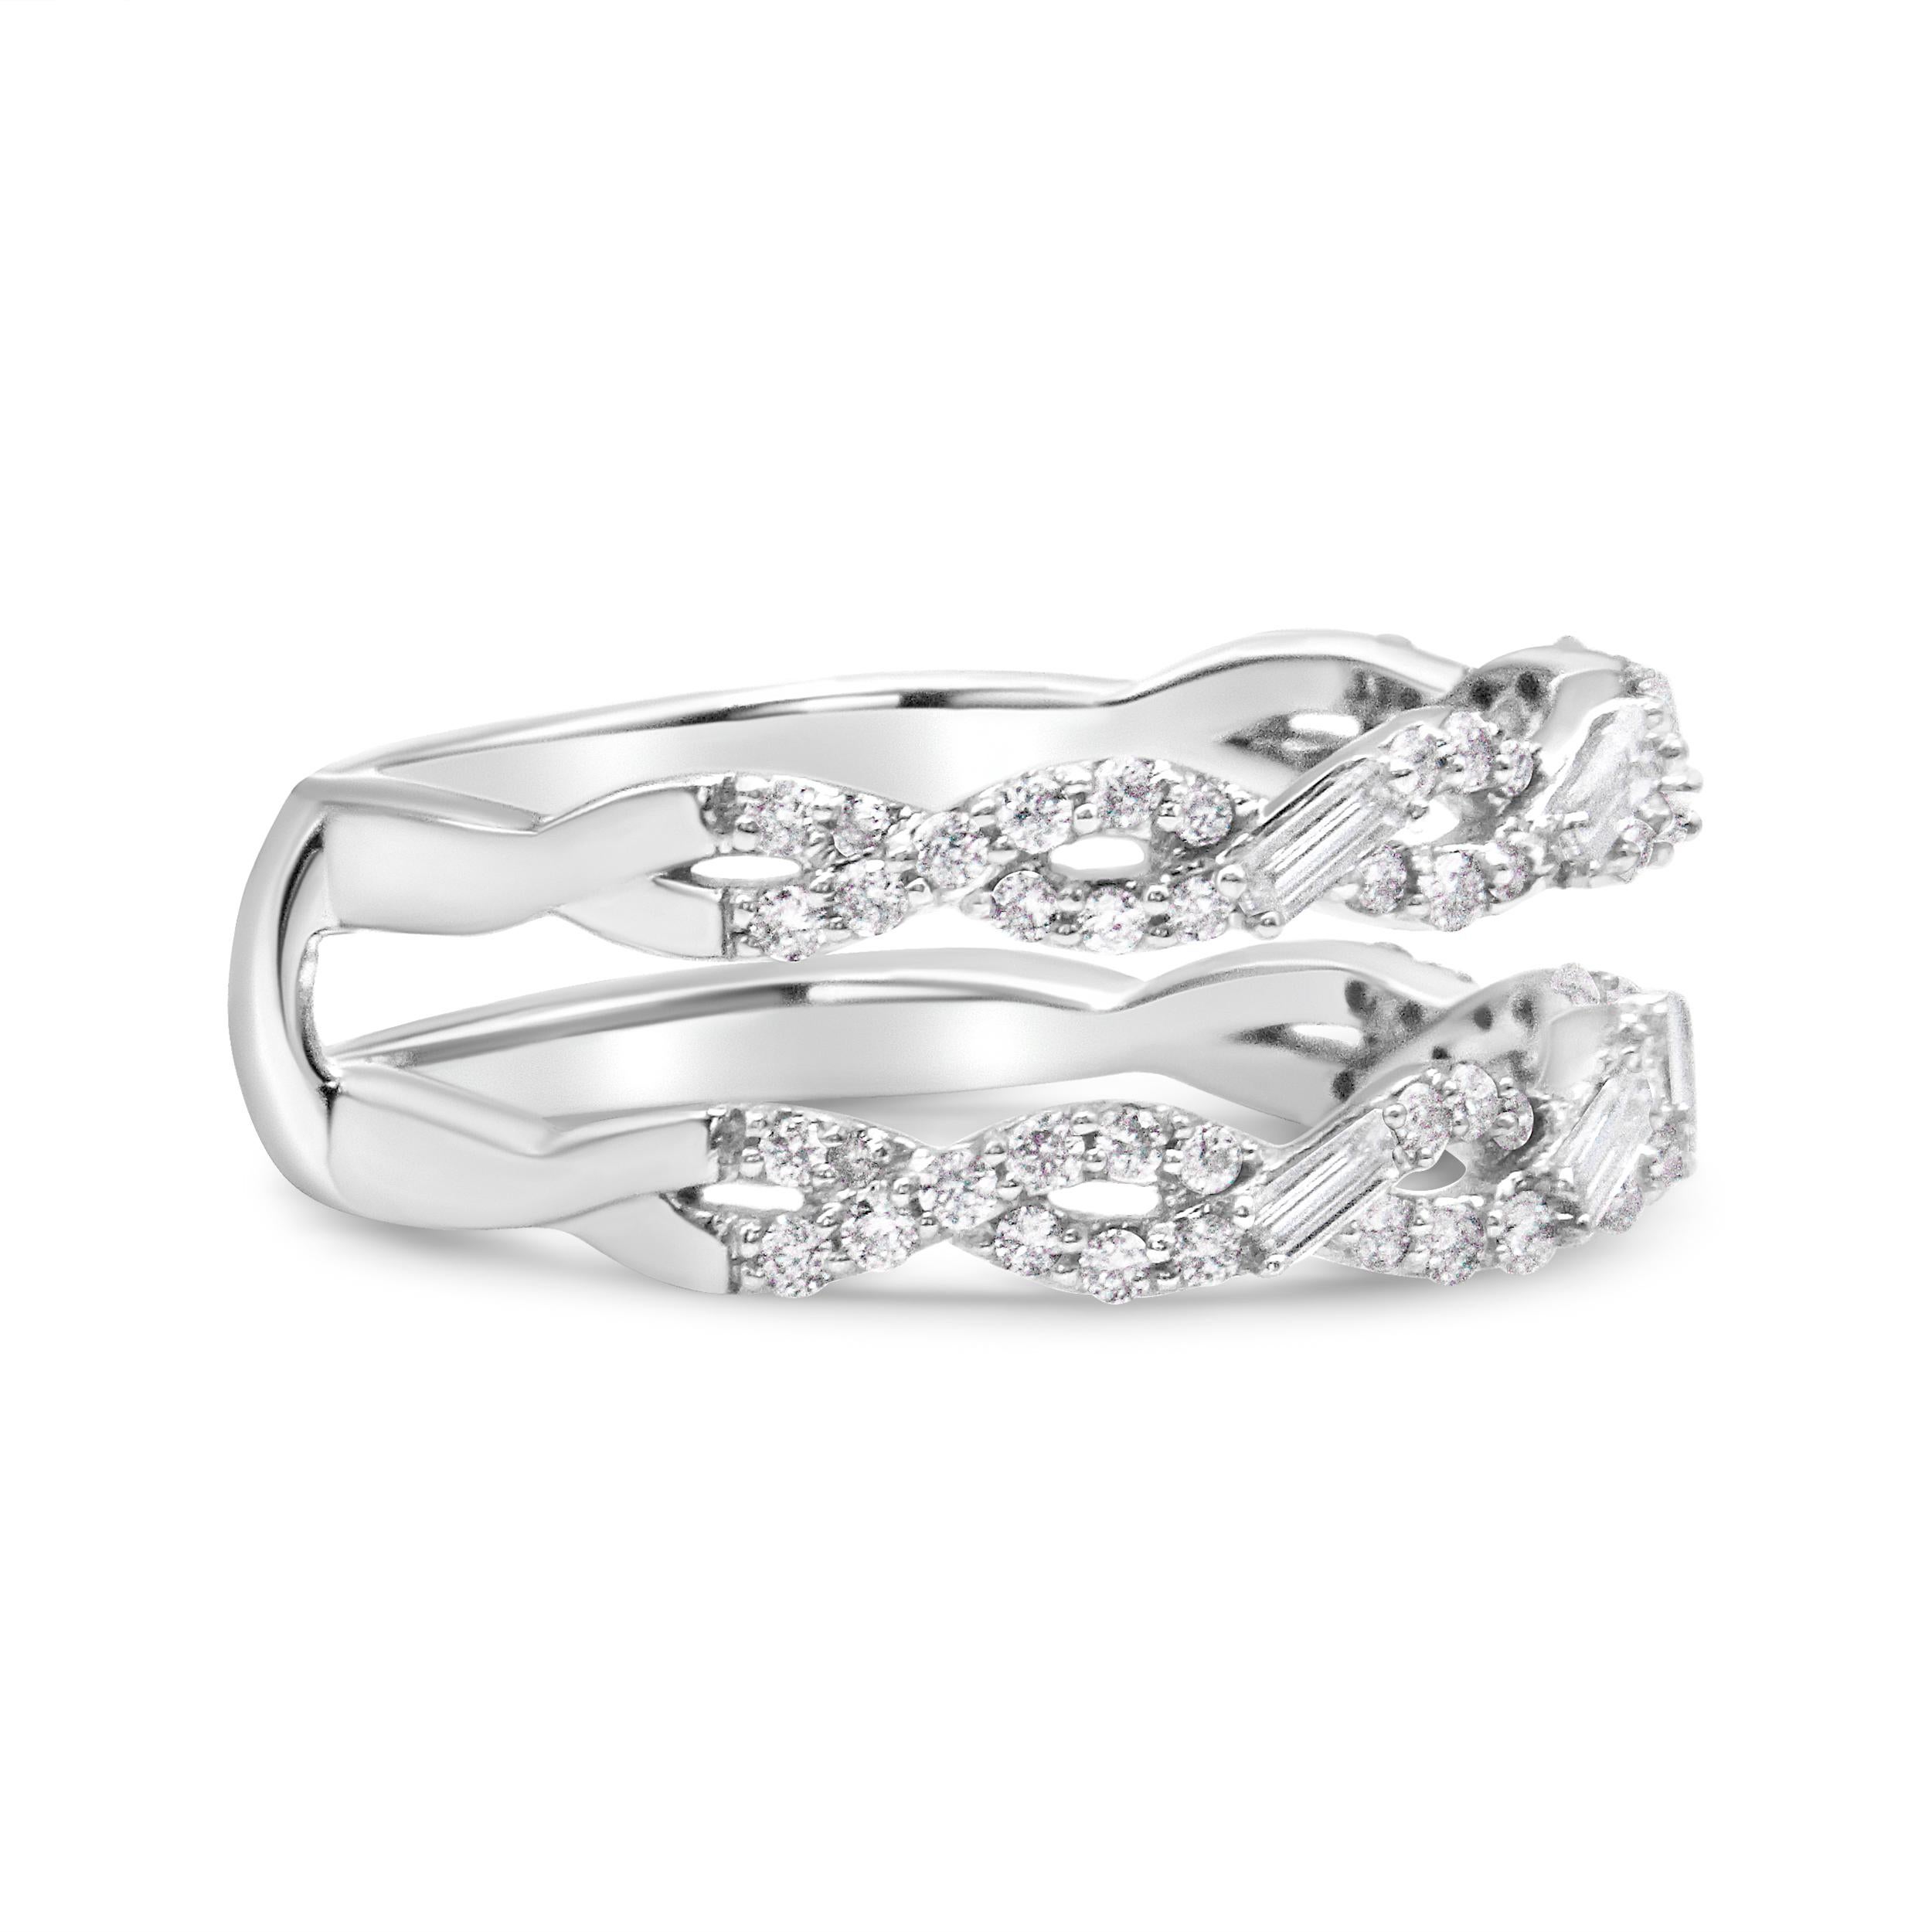 Two dazzling rows of white natural diamonds makes this ring guard enhancer a stunning complement your solitaire engagement ring, while also keeping it firmly in place. This enhancer band features two swirling parallel bands that take on an infinity